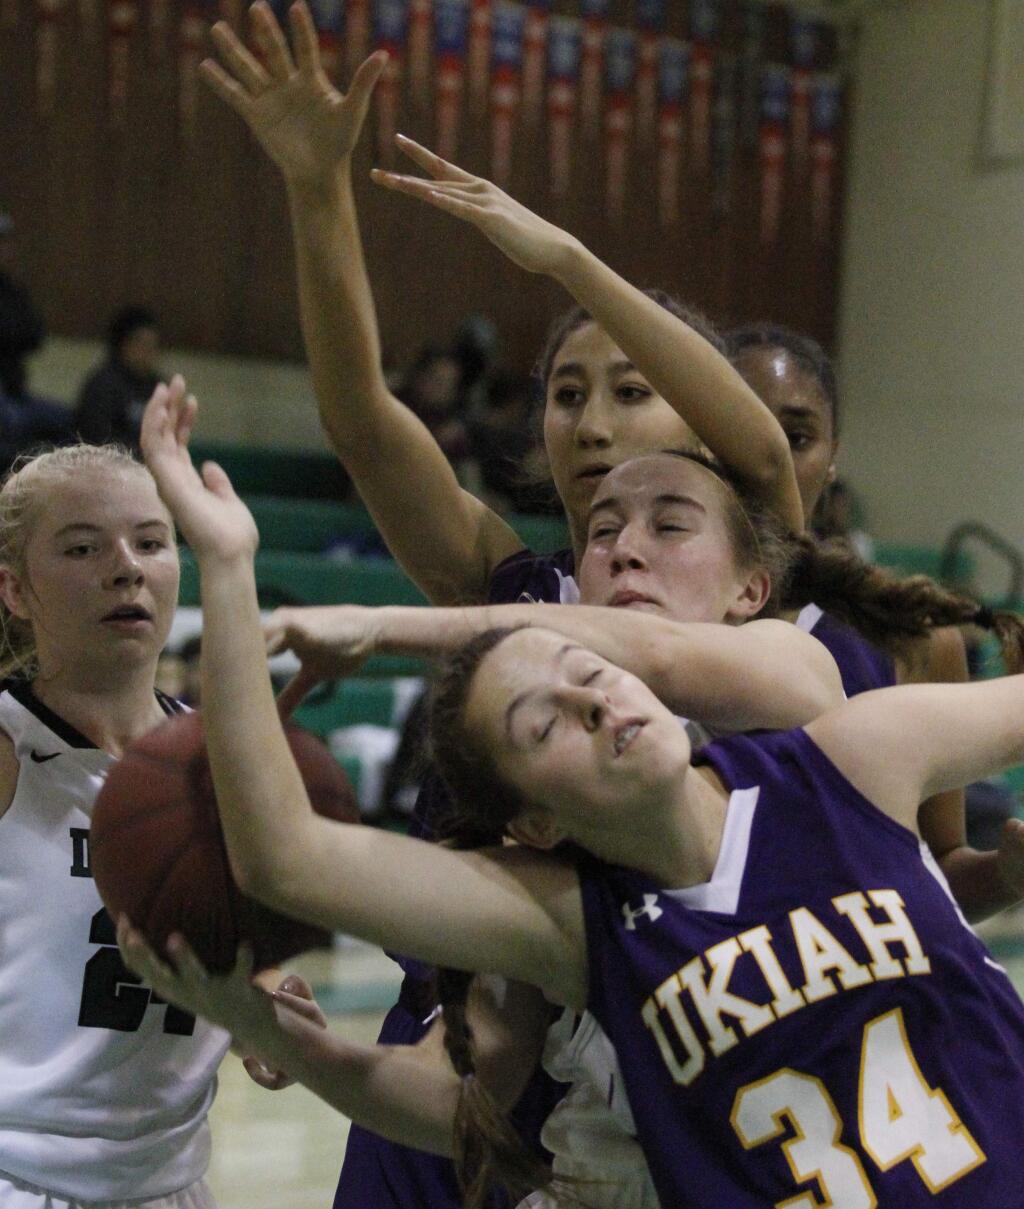 Bill Hoban/Index-TribuneSonoma's Kennedy Midgley tries to control a rebound while teammate Alyssa Schimm (#24) waits to lend a hand during Friday night's game against Ukiah.